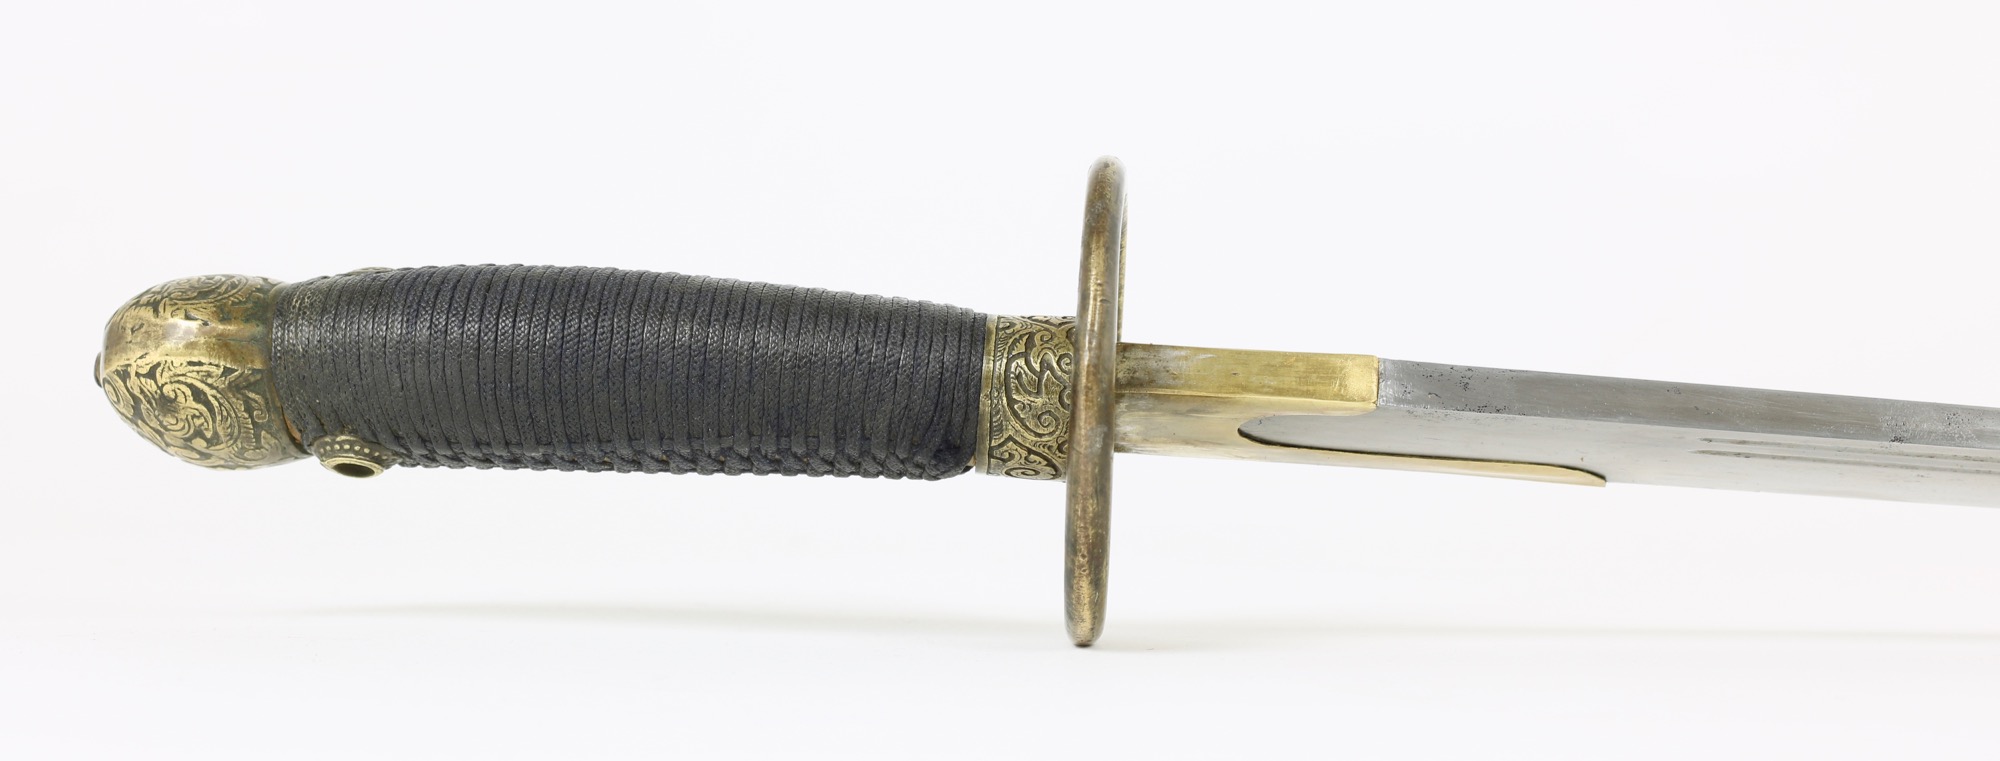 A Chinese southern saber with fine blade